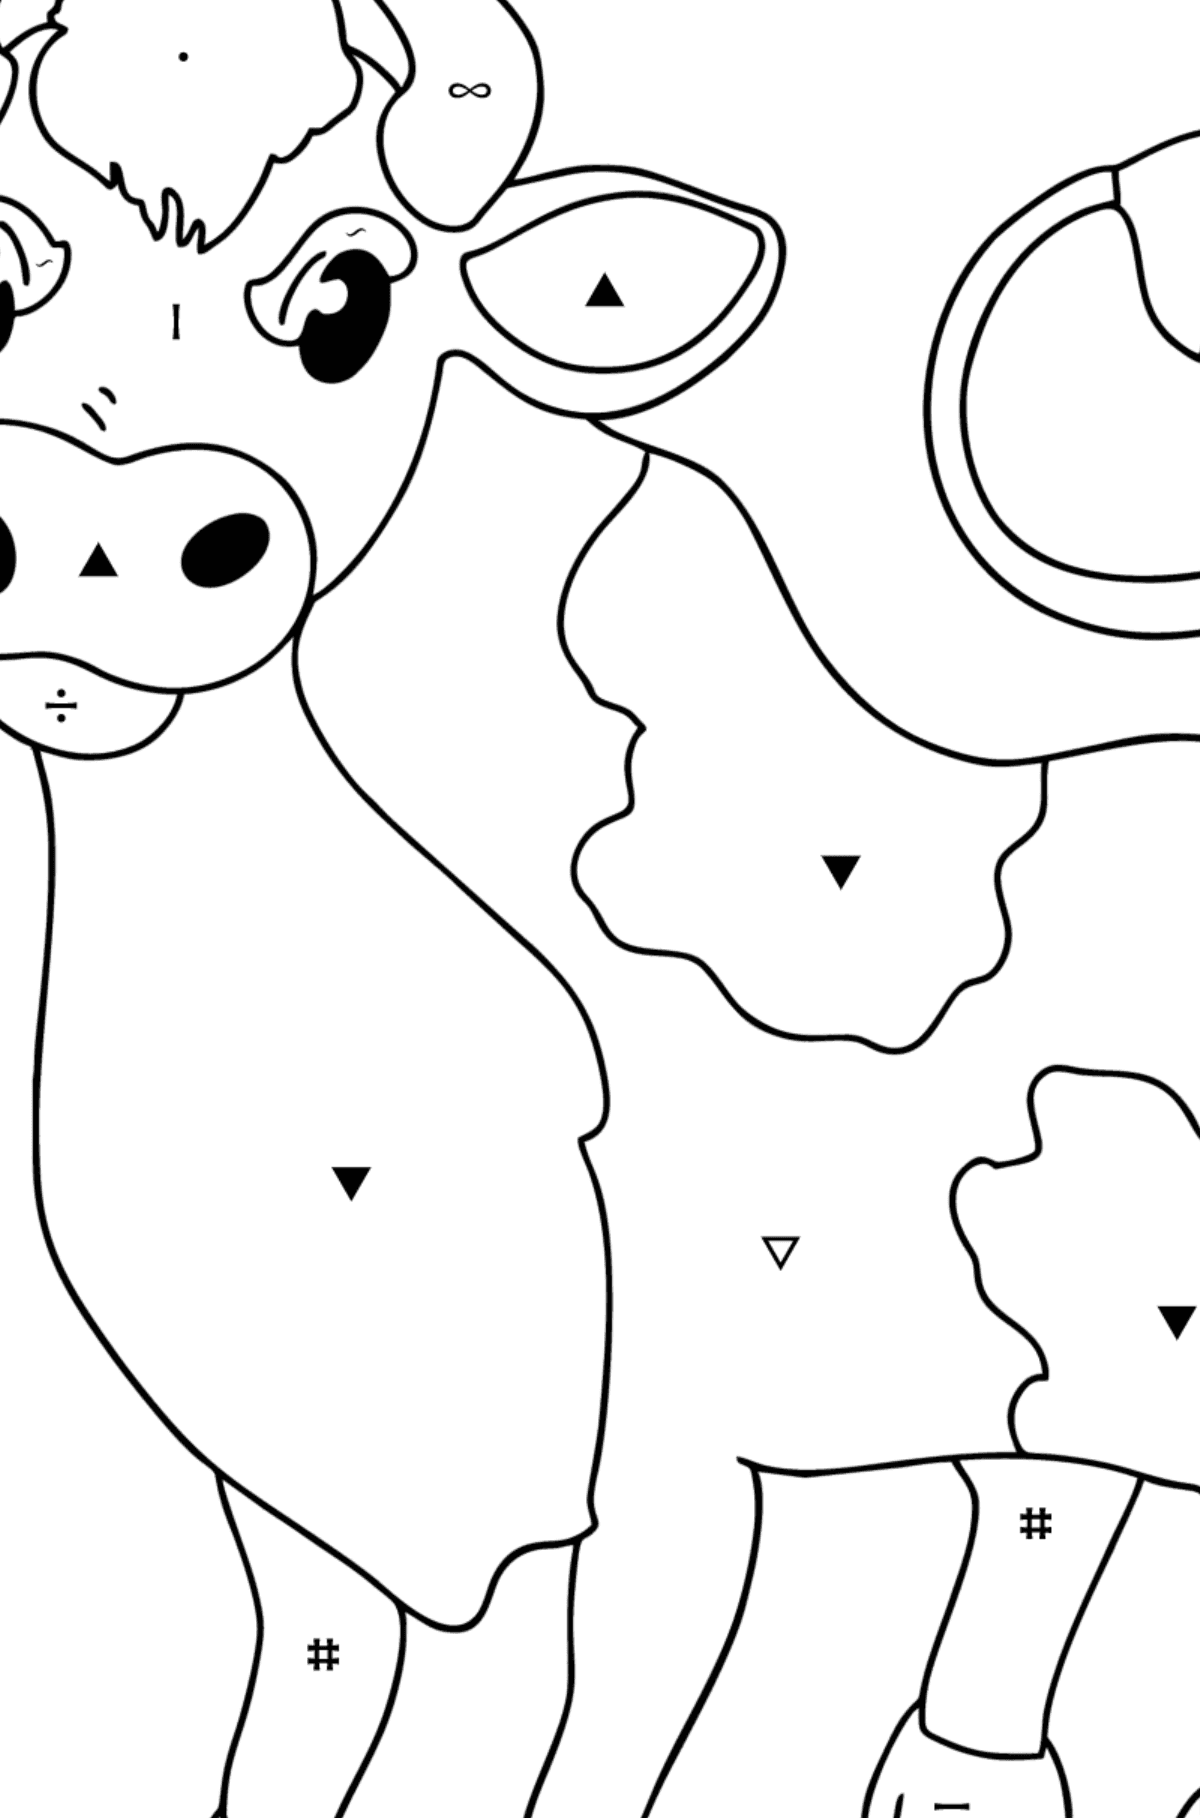 Gray bull coloring page - Coloring by Symbols for Kids